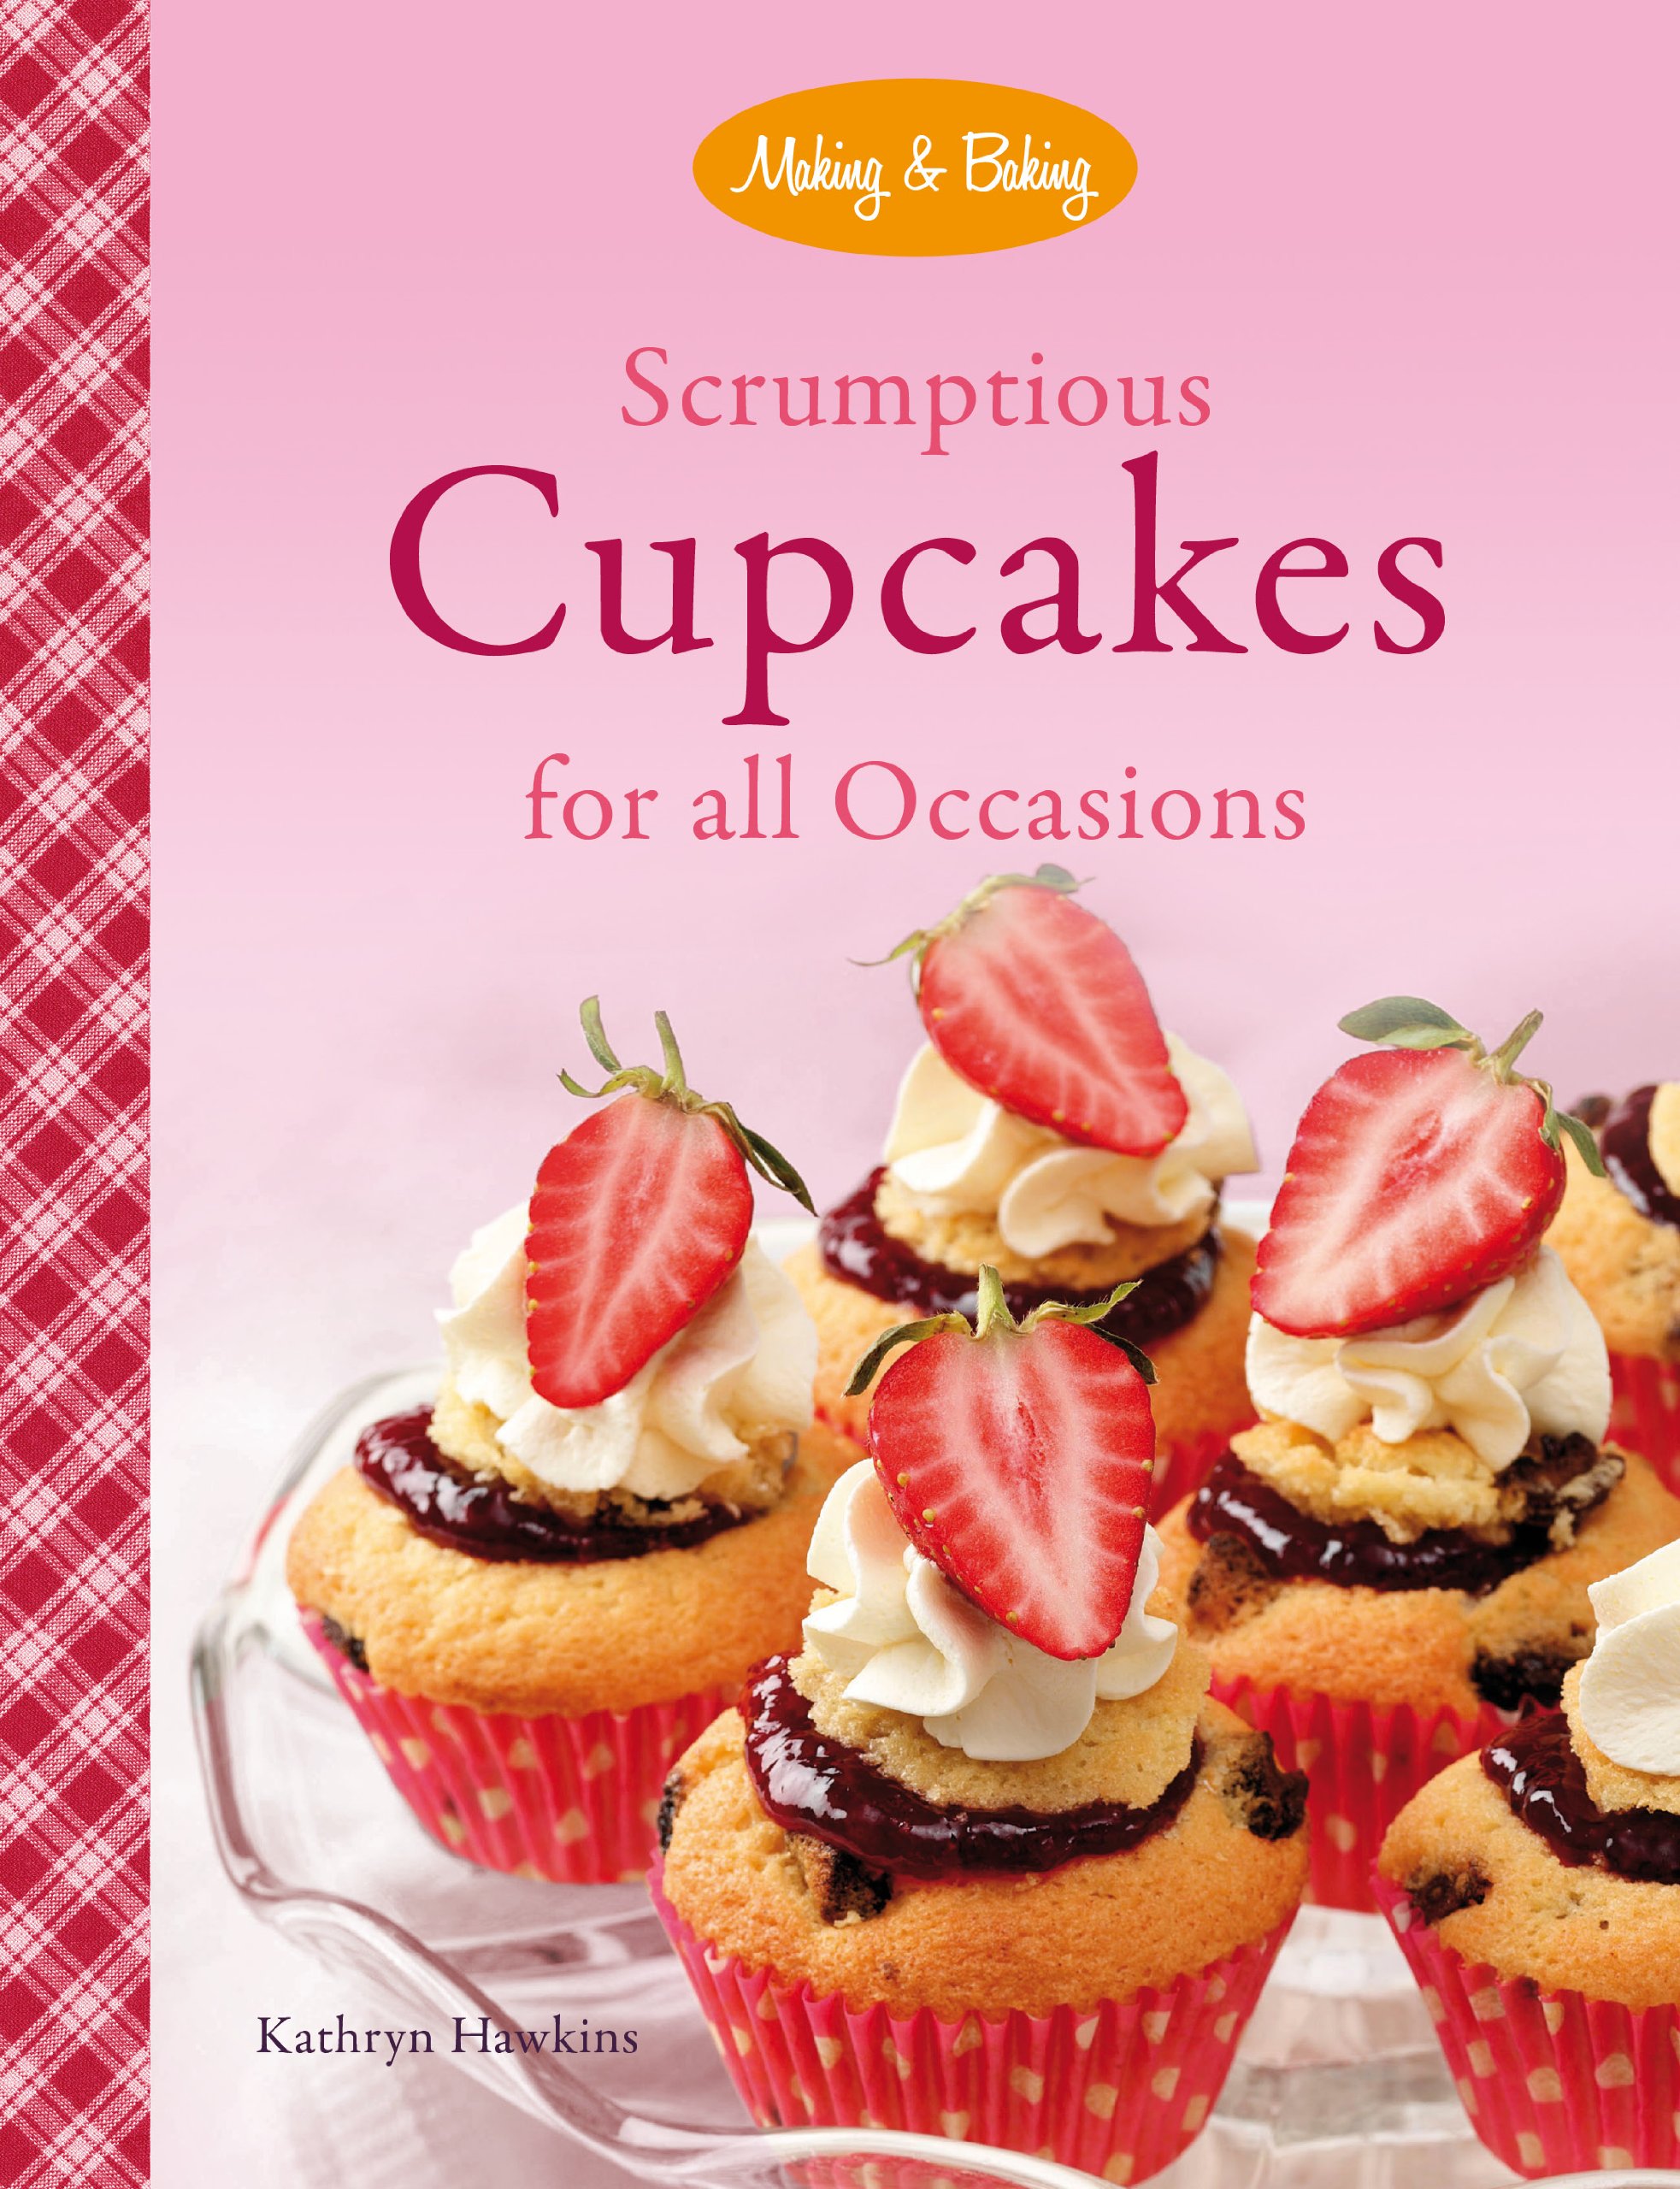 Scrumptious Cupcakes For All Occasions